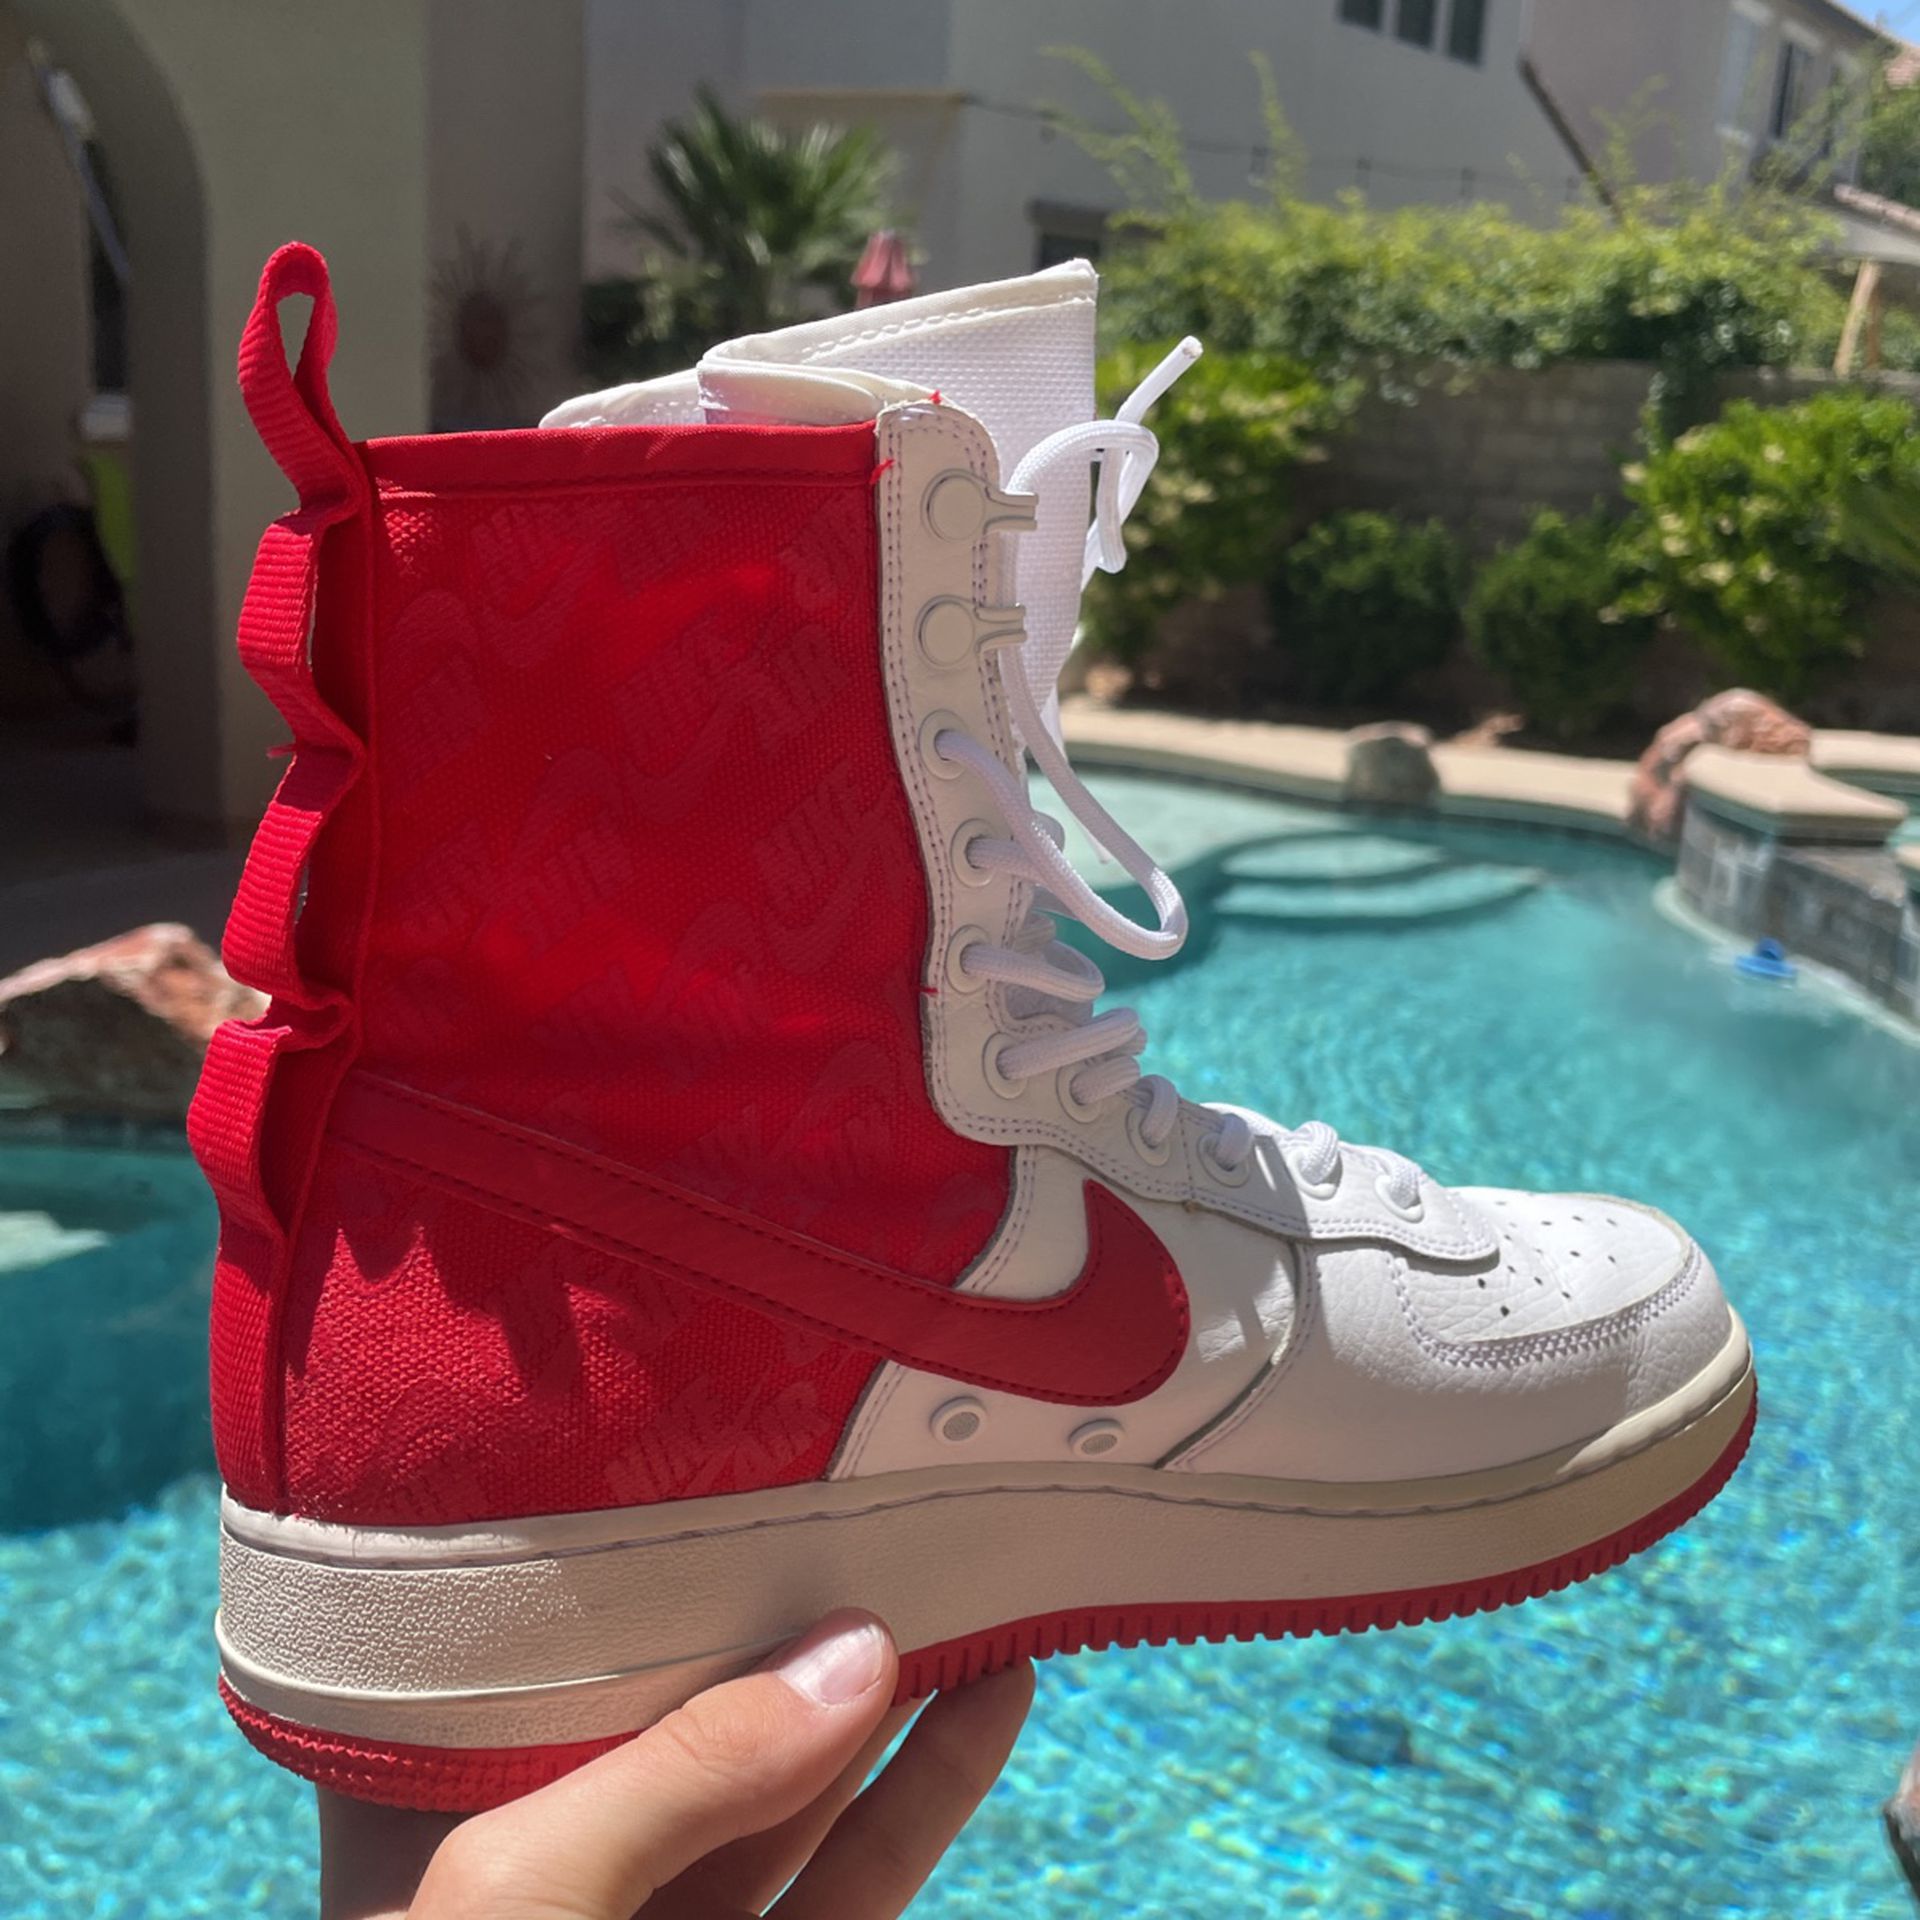 Nike SF Air Force 1 High White University Red